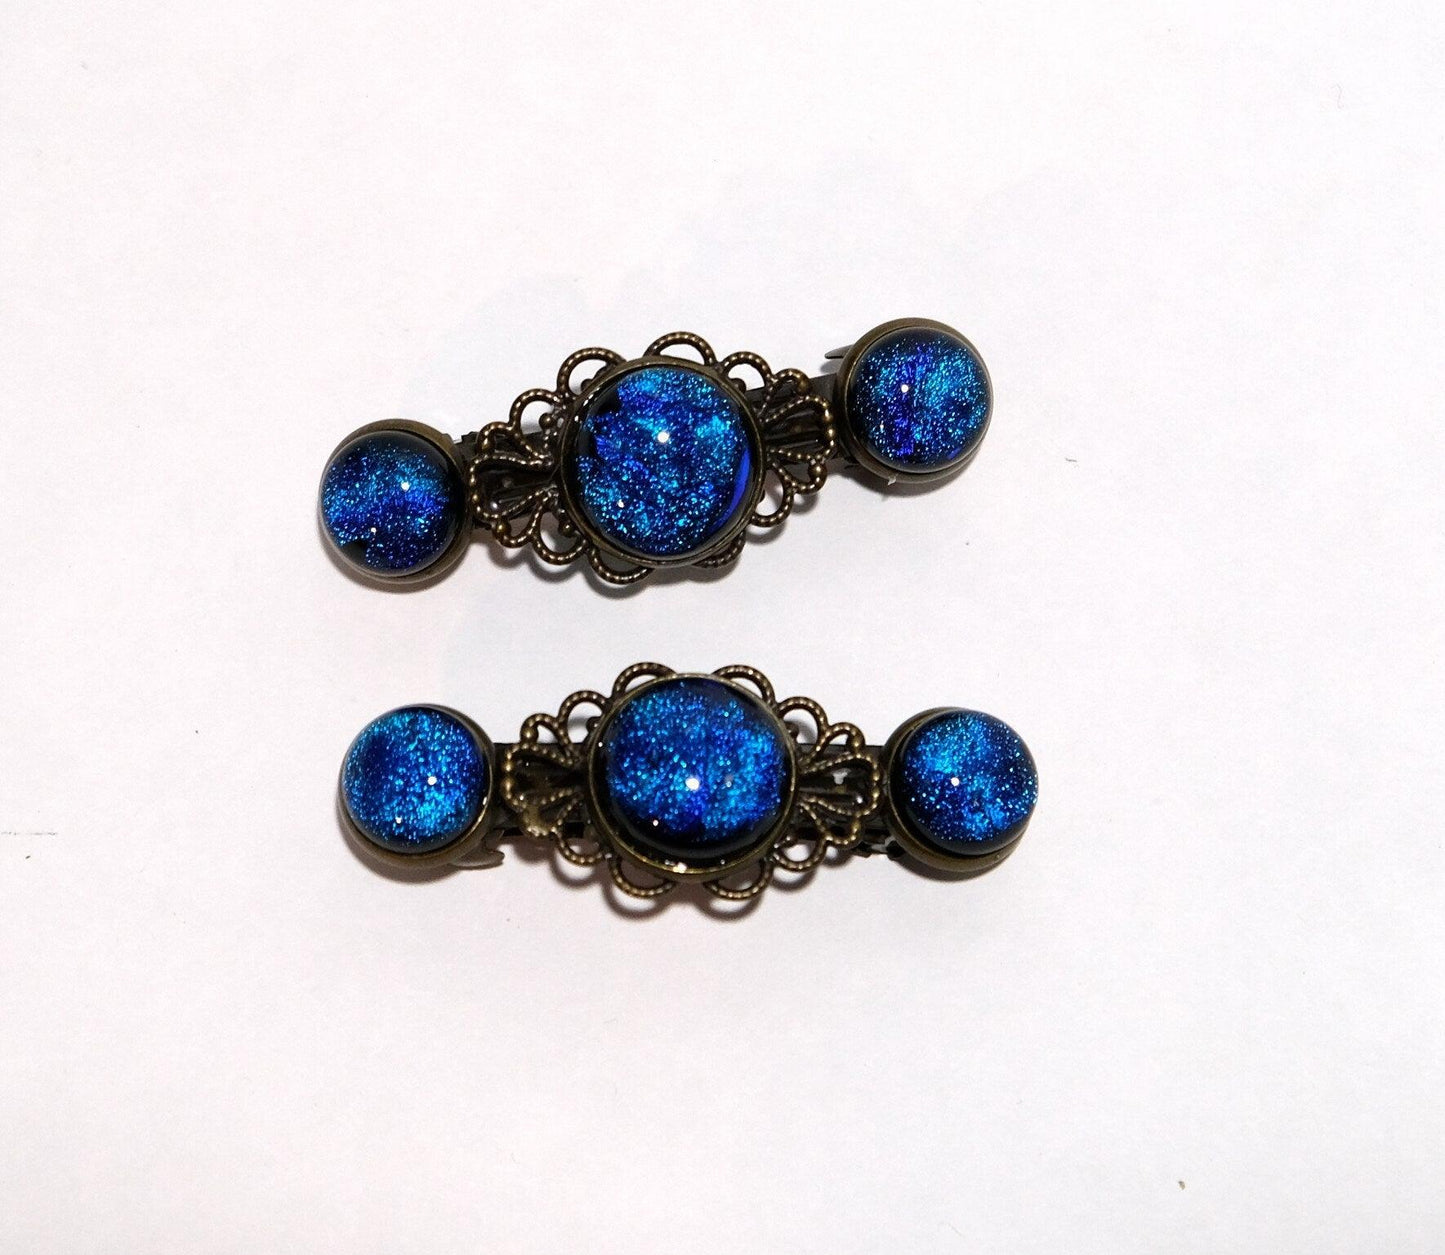 Barrette pair, bronze flowers with blue dichroic fused glass cabochons, french clip, 2 1/4 inches